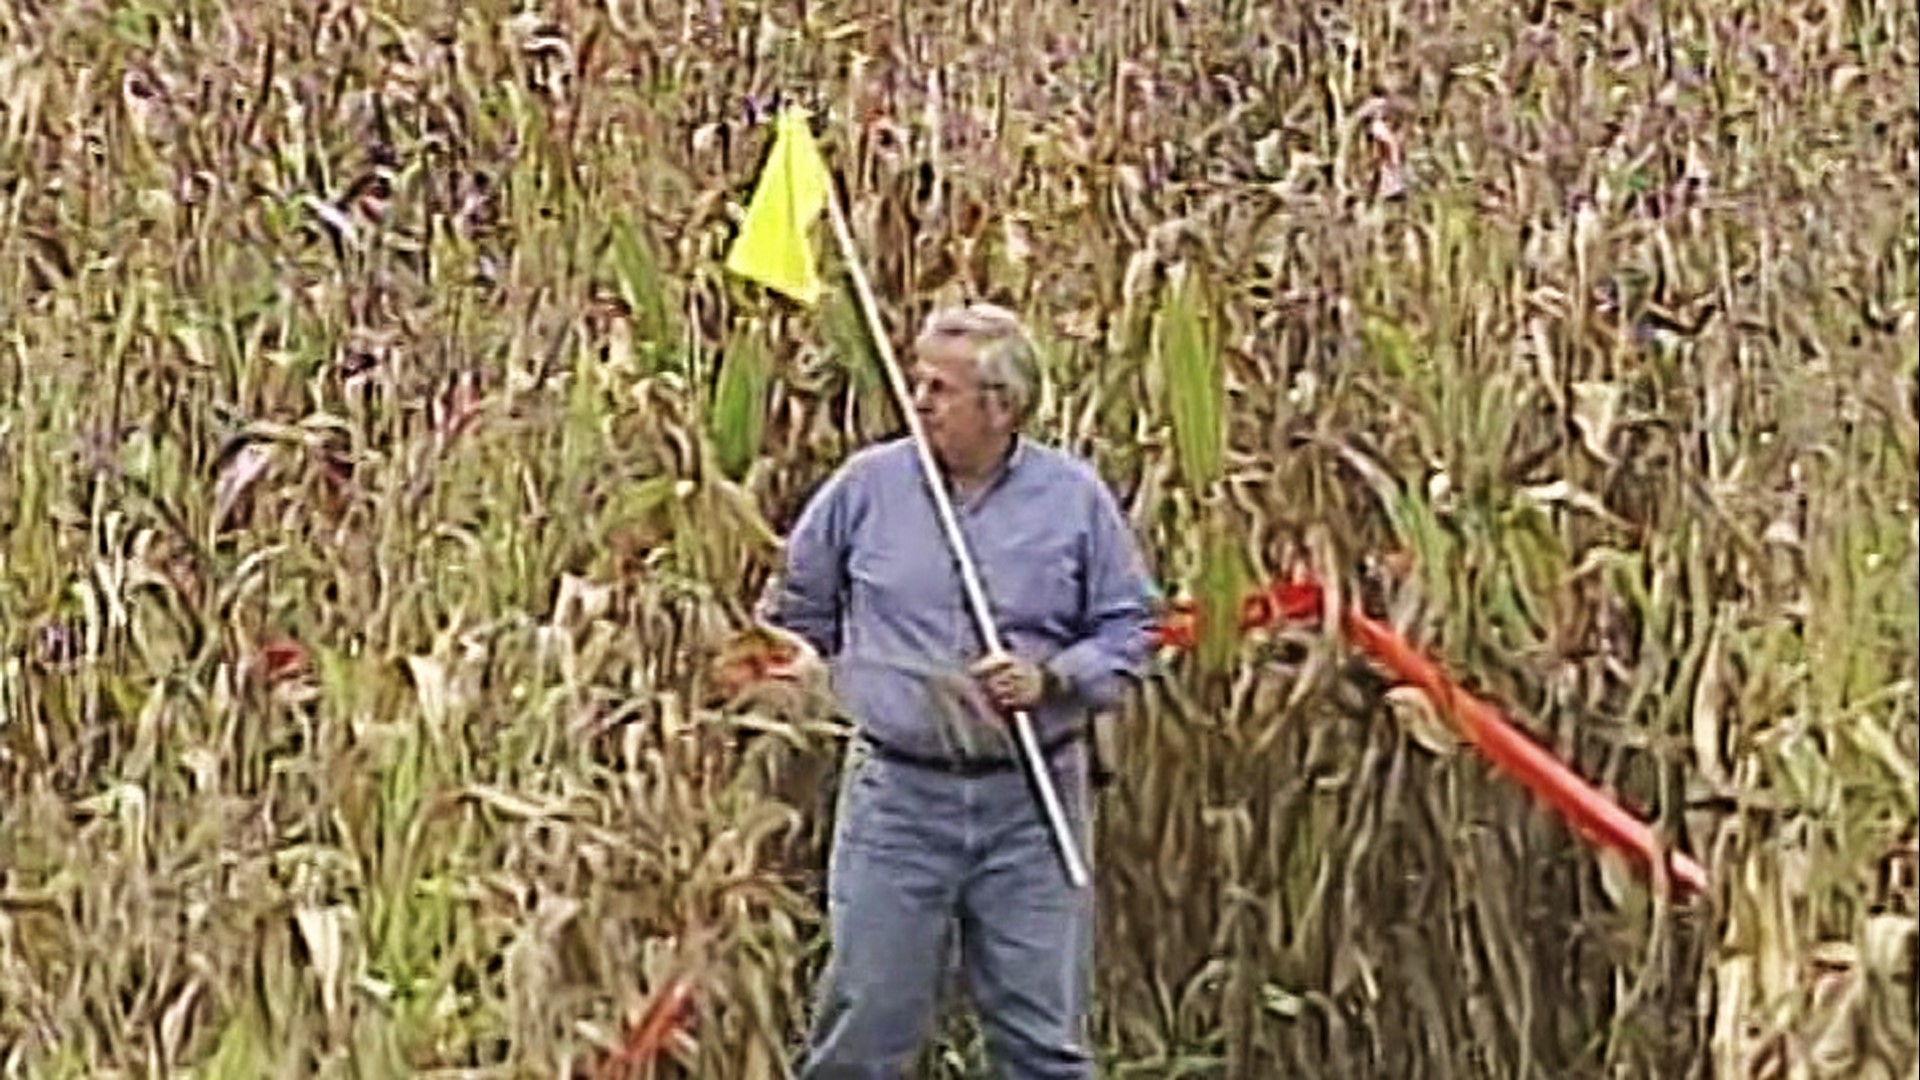 Mike Stevens gets lost looking for fall fun in this trip back to 2002.